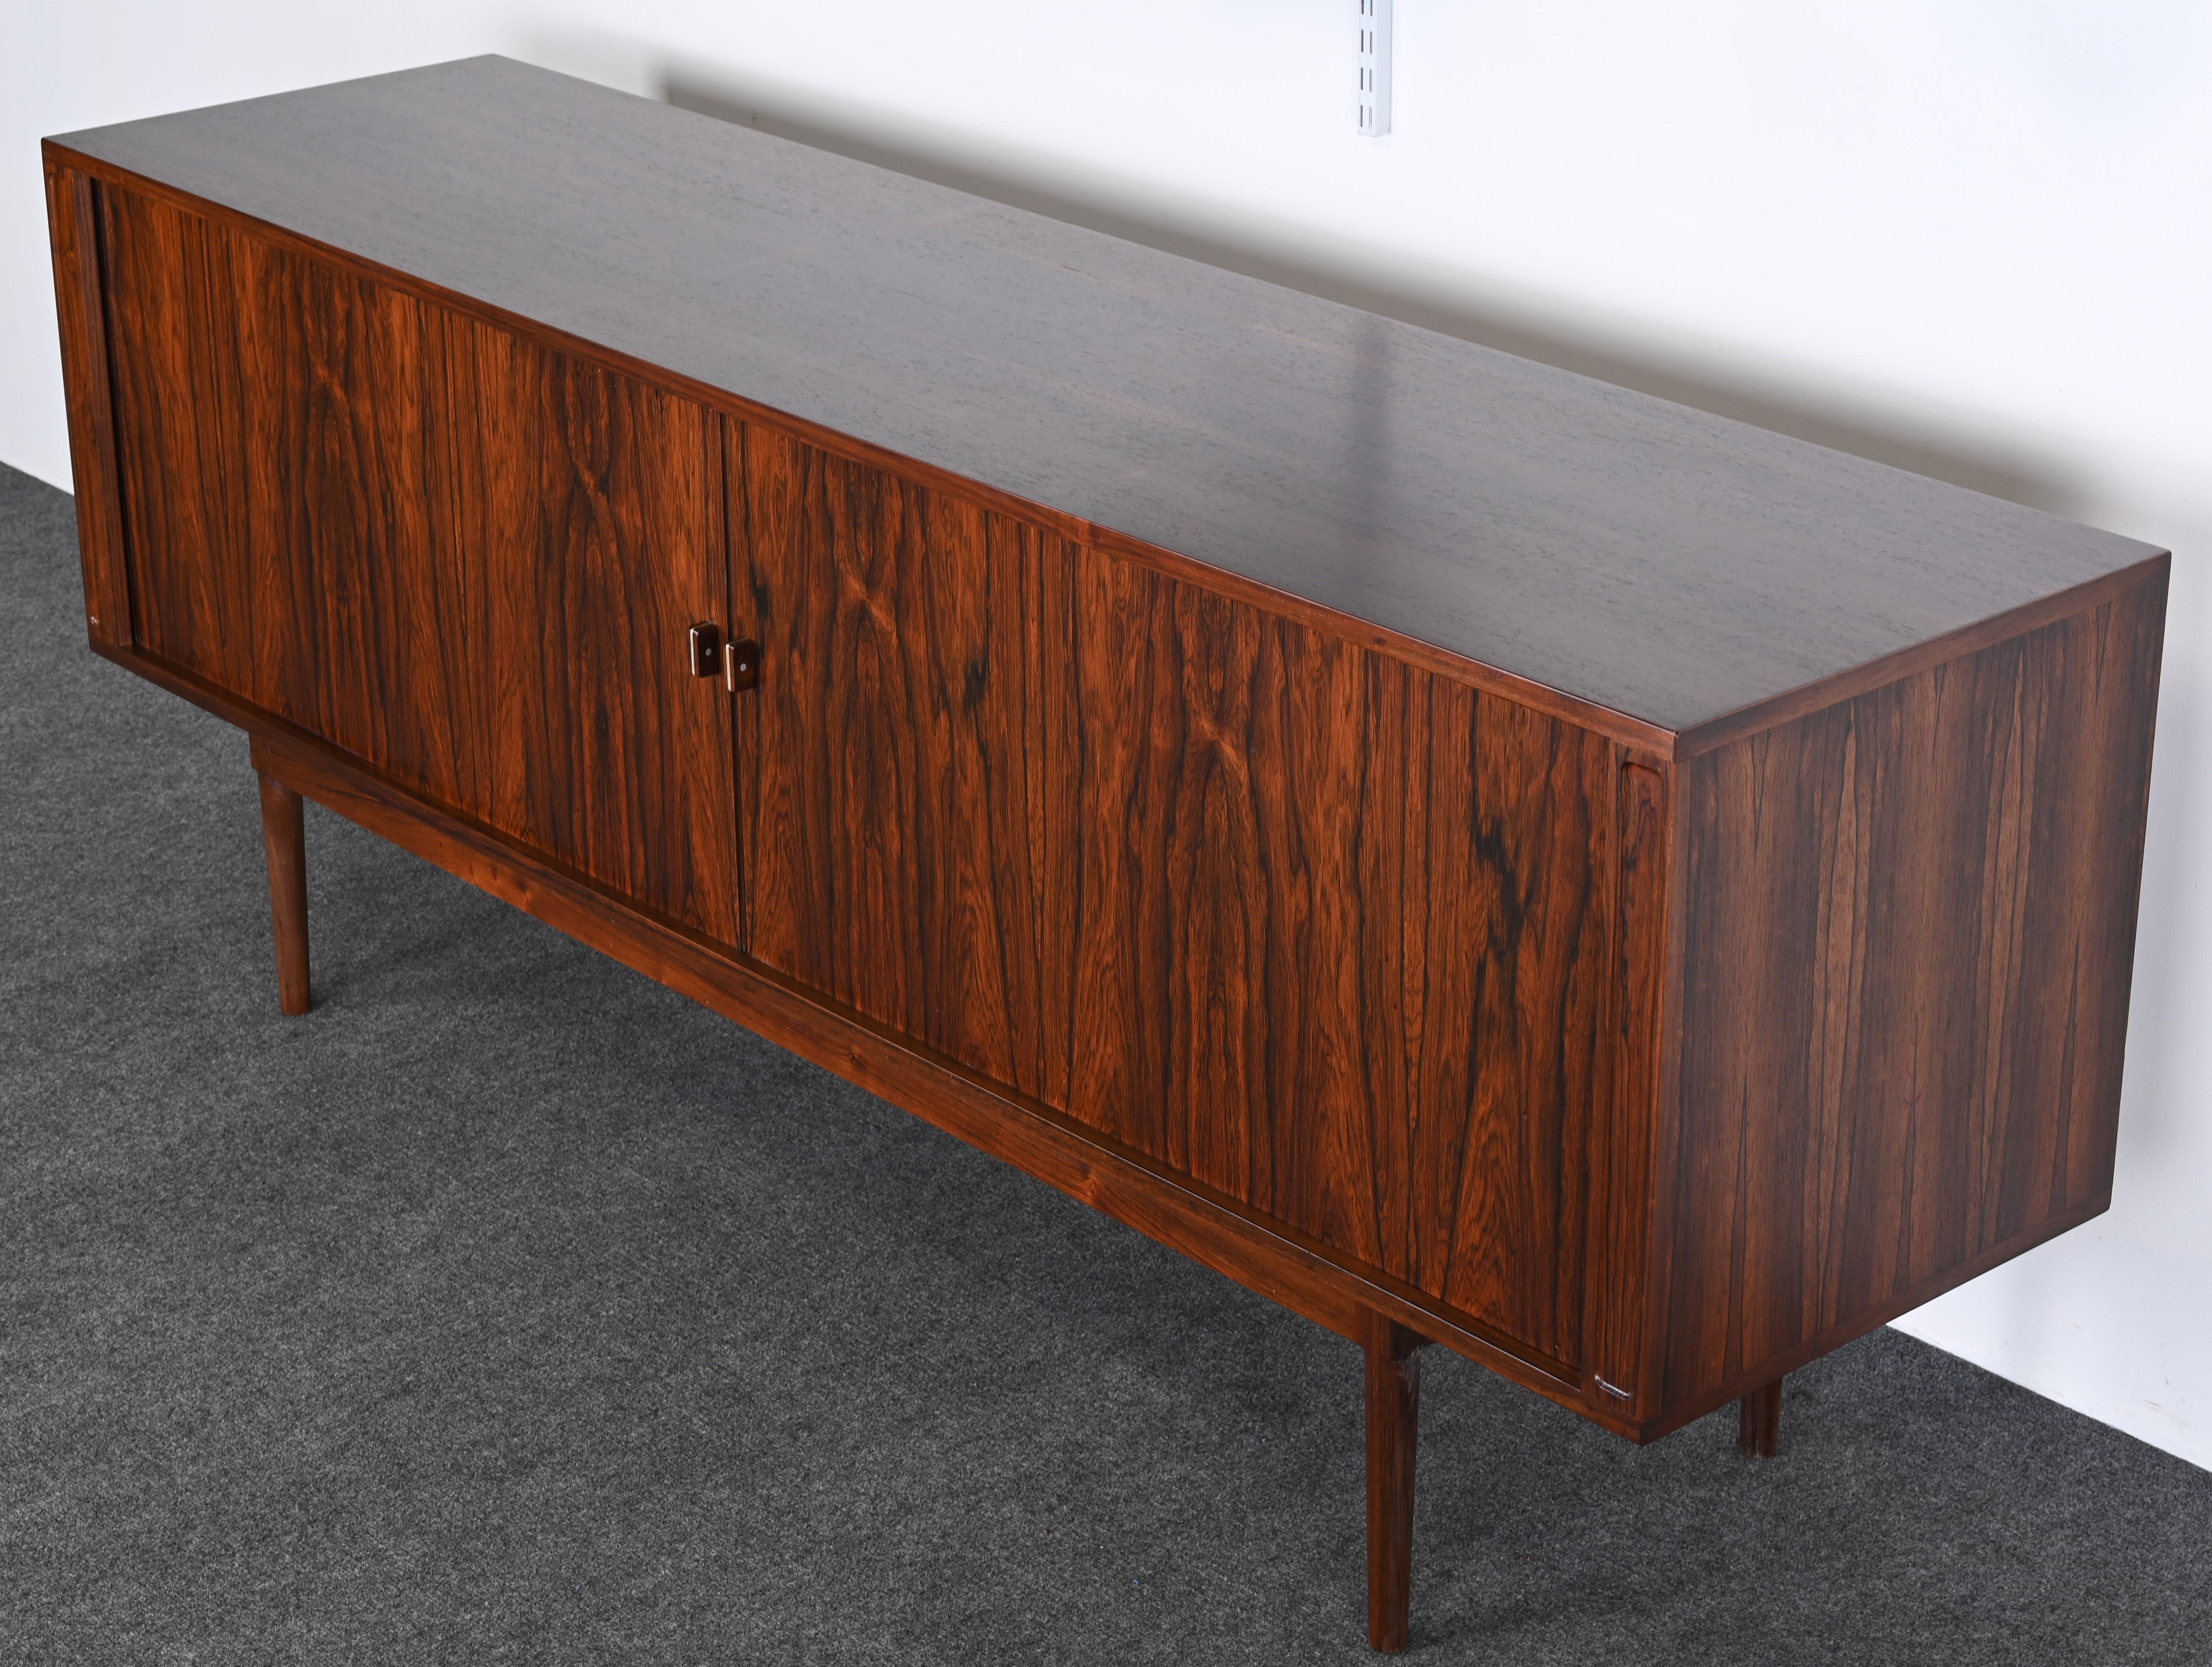 An excellent example of a rosewood sideboard designed by Peter Lovig Nielsen. The handsome rosewood credenza has much depth and graining to the veneer and the simple details of the handles are exquisite. This beautiful credenza would look great in